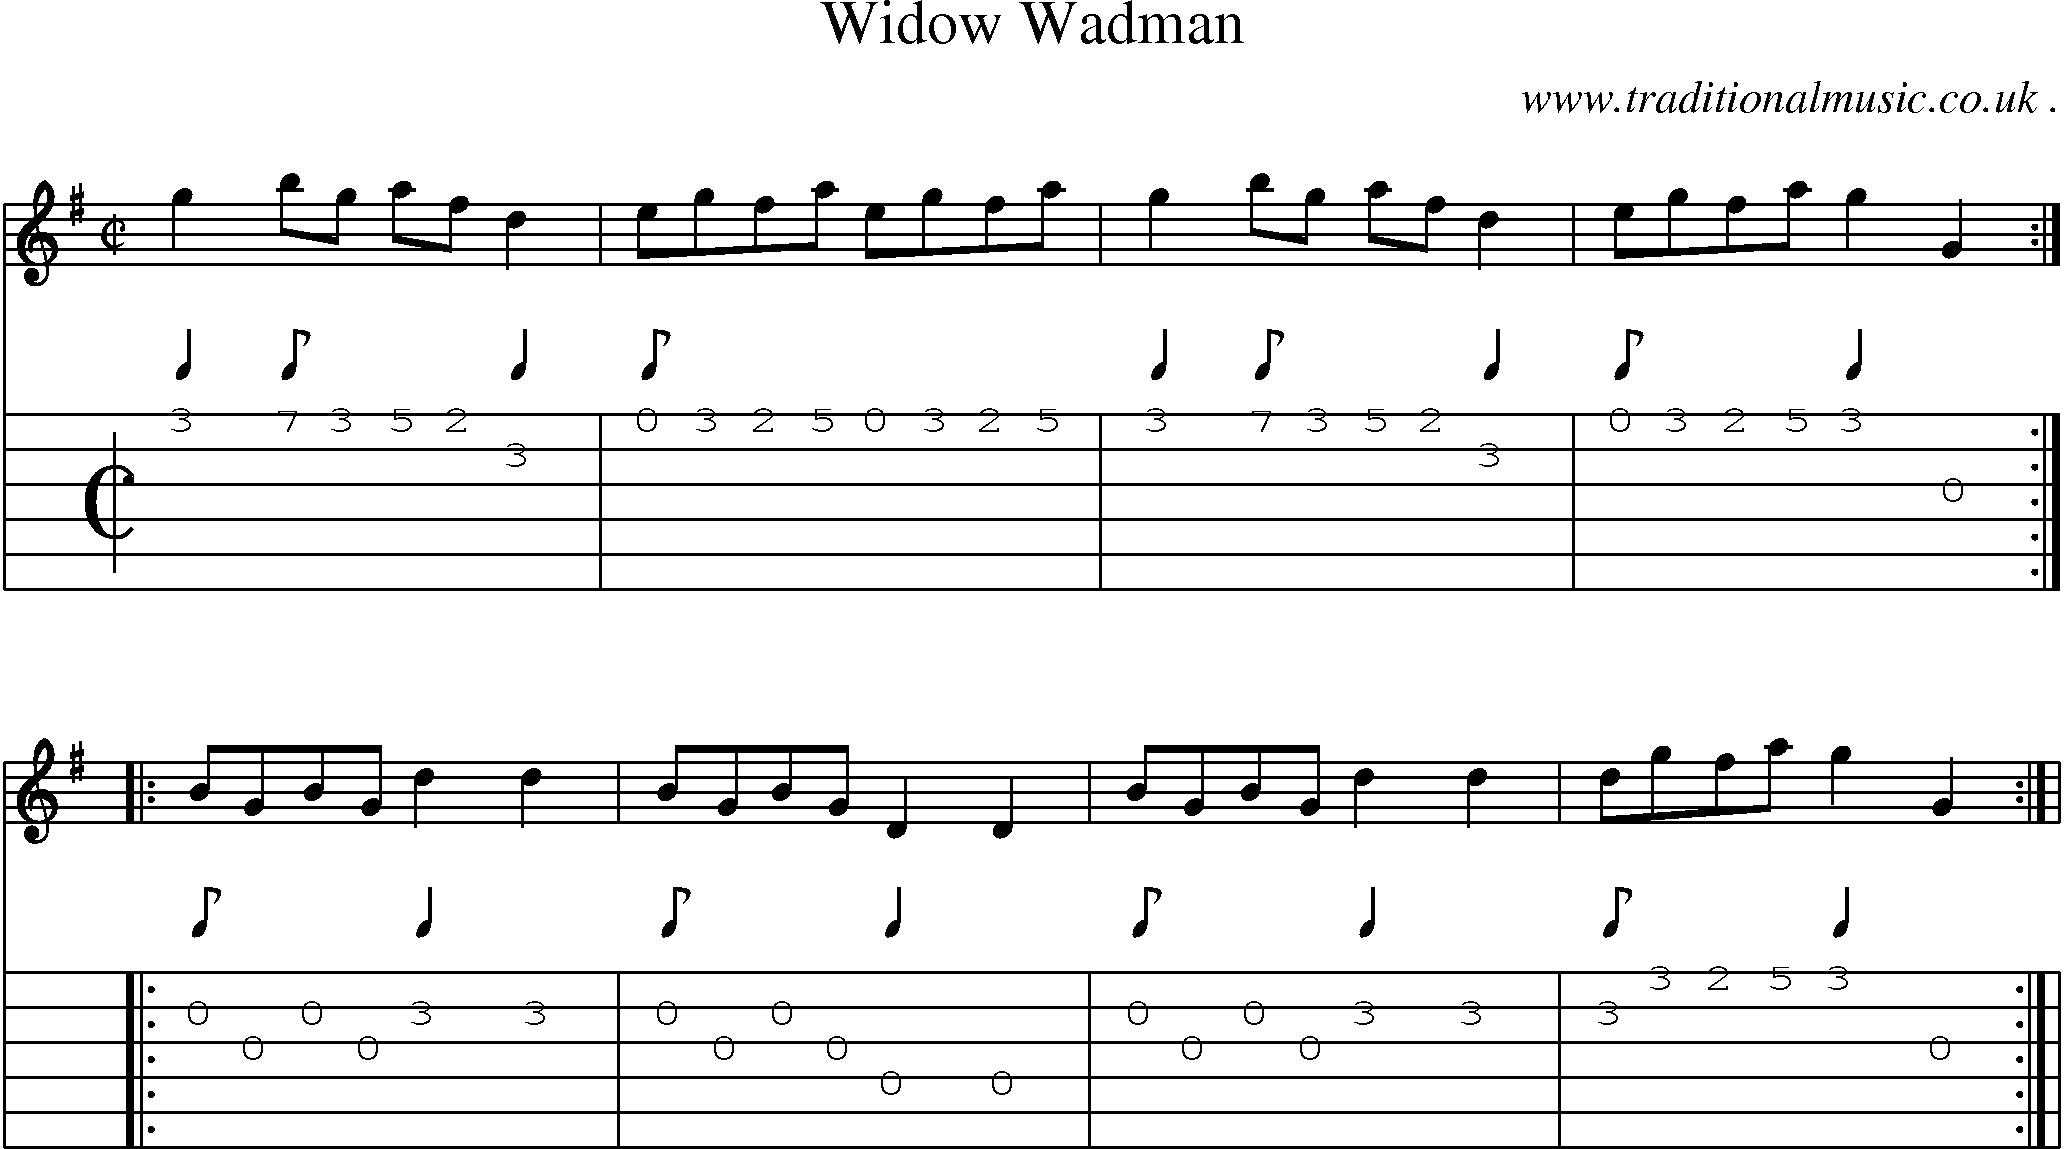 Sheet-Music and Guitar Tabs for Widow Wadman